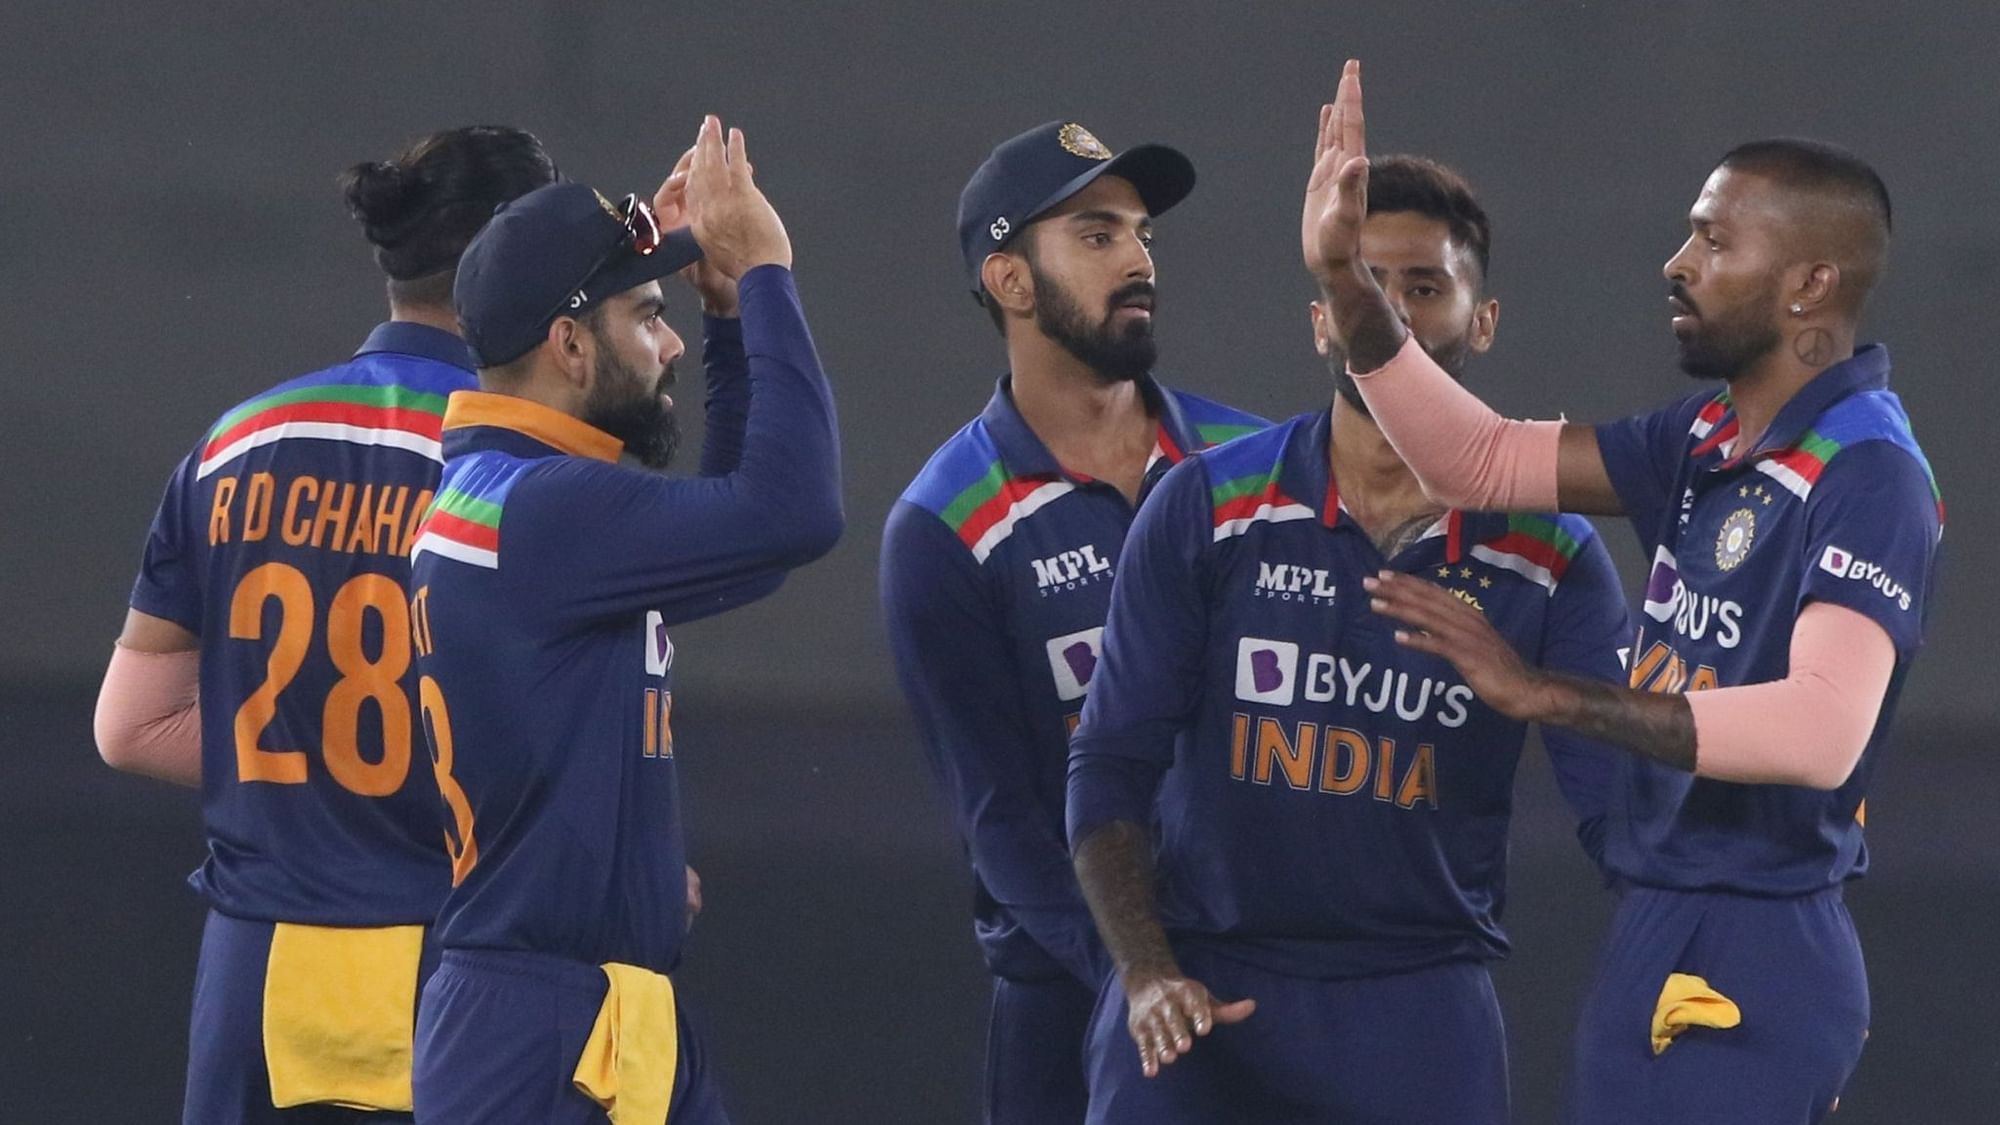 India take a 1-0 lead in the ODI series with a 66 run victory over England in Pune.